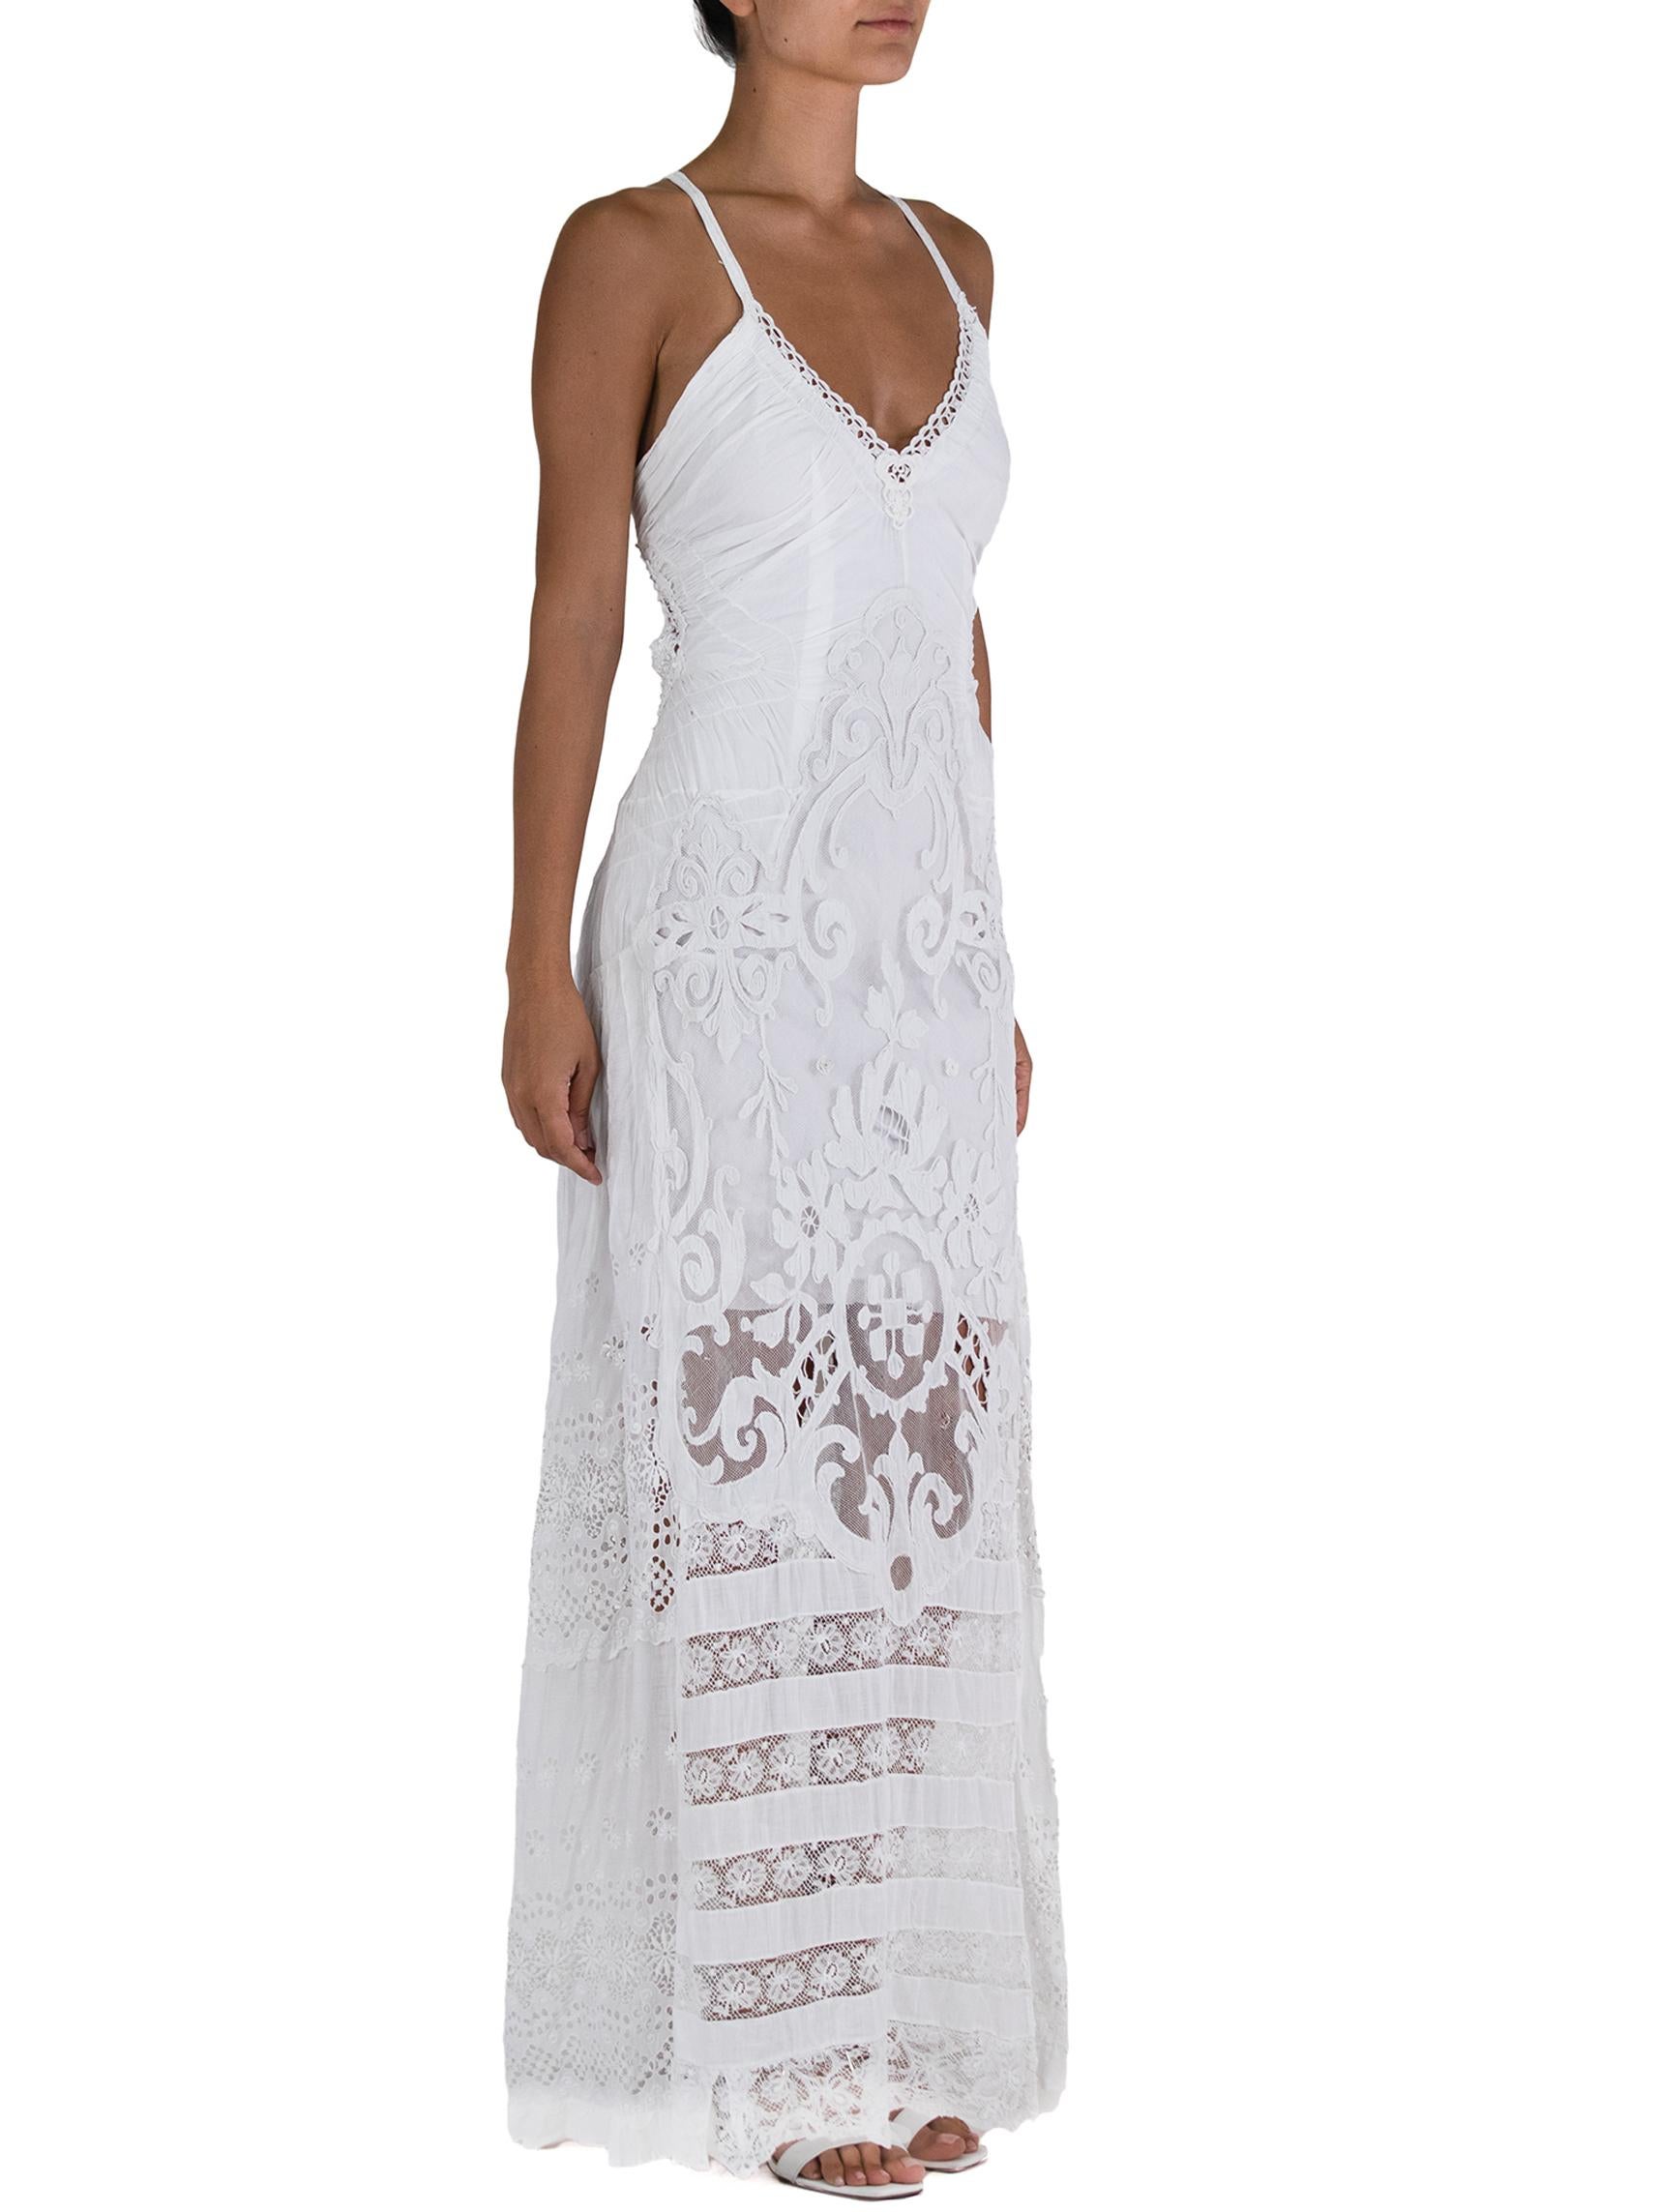 Morphew Atelier White Vintage Lace Dress In Excellent Condition For Sale In New York, NY